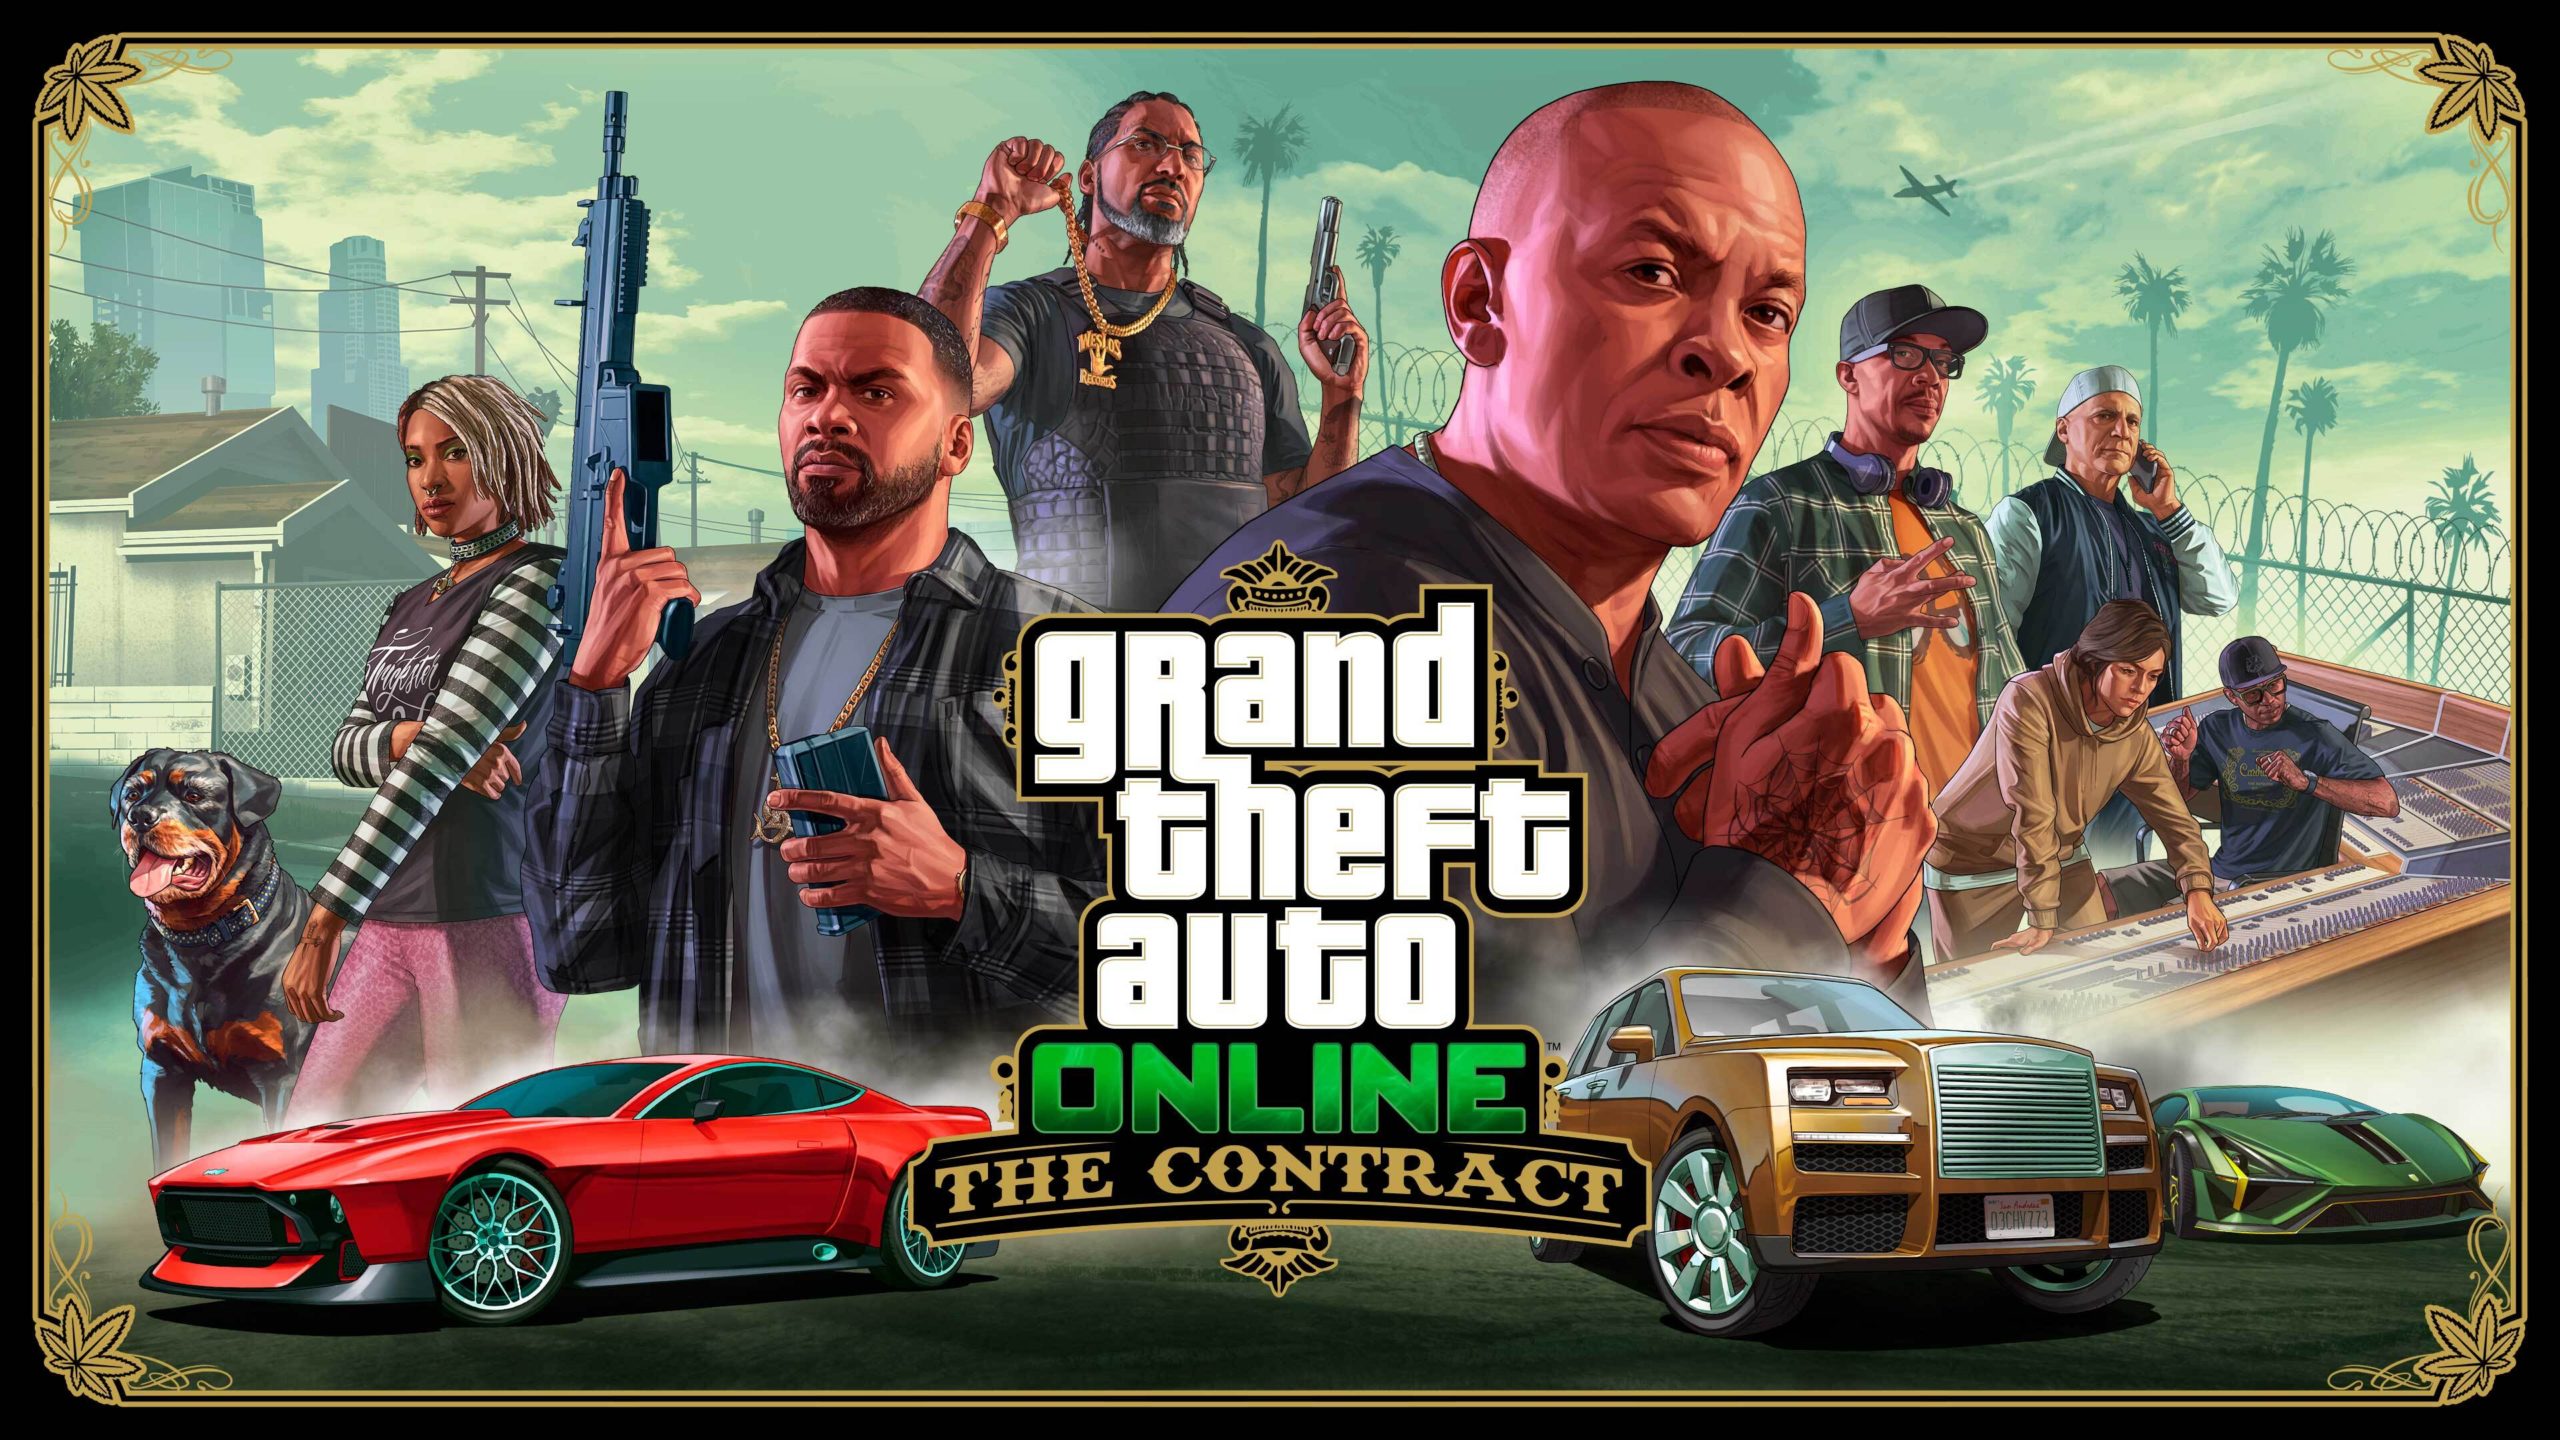 GTA Online The Contract Confirmed What happened to Michael after GTA 5